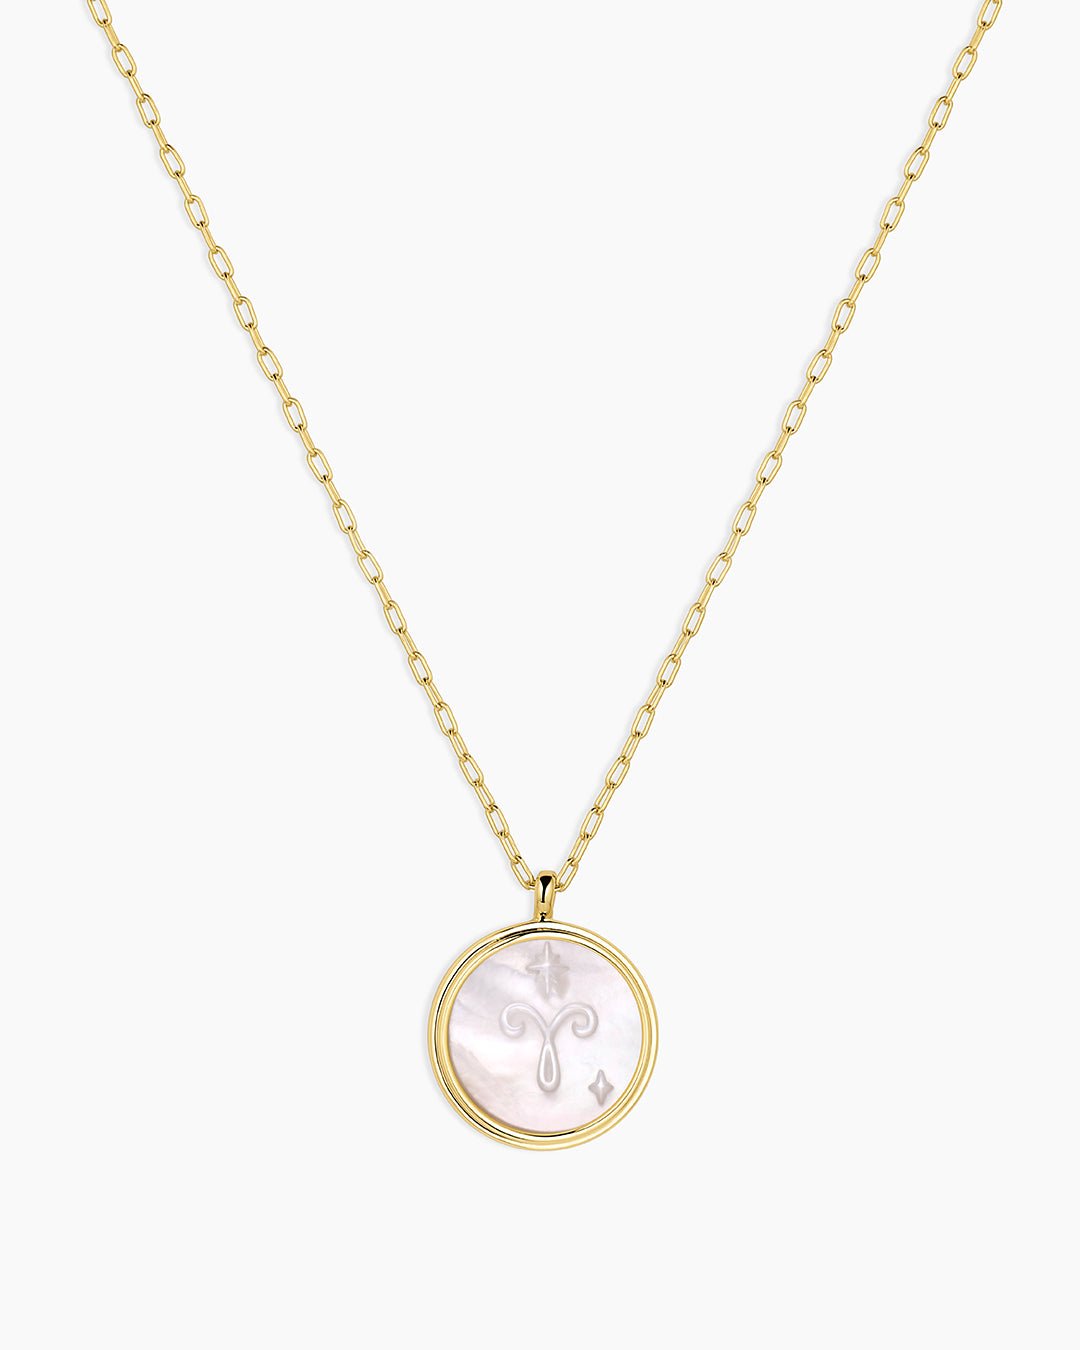 Zodiac Necklace - Gemini, Astrology Coin Necklace, Gemini Necklace || option::Gold Plated, Aries